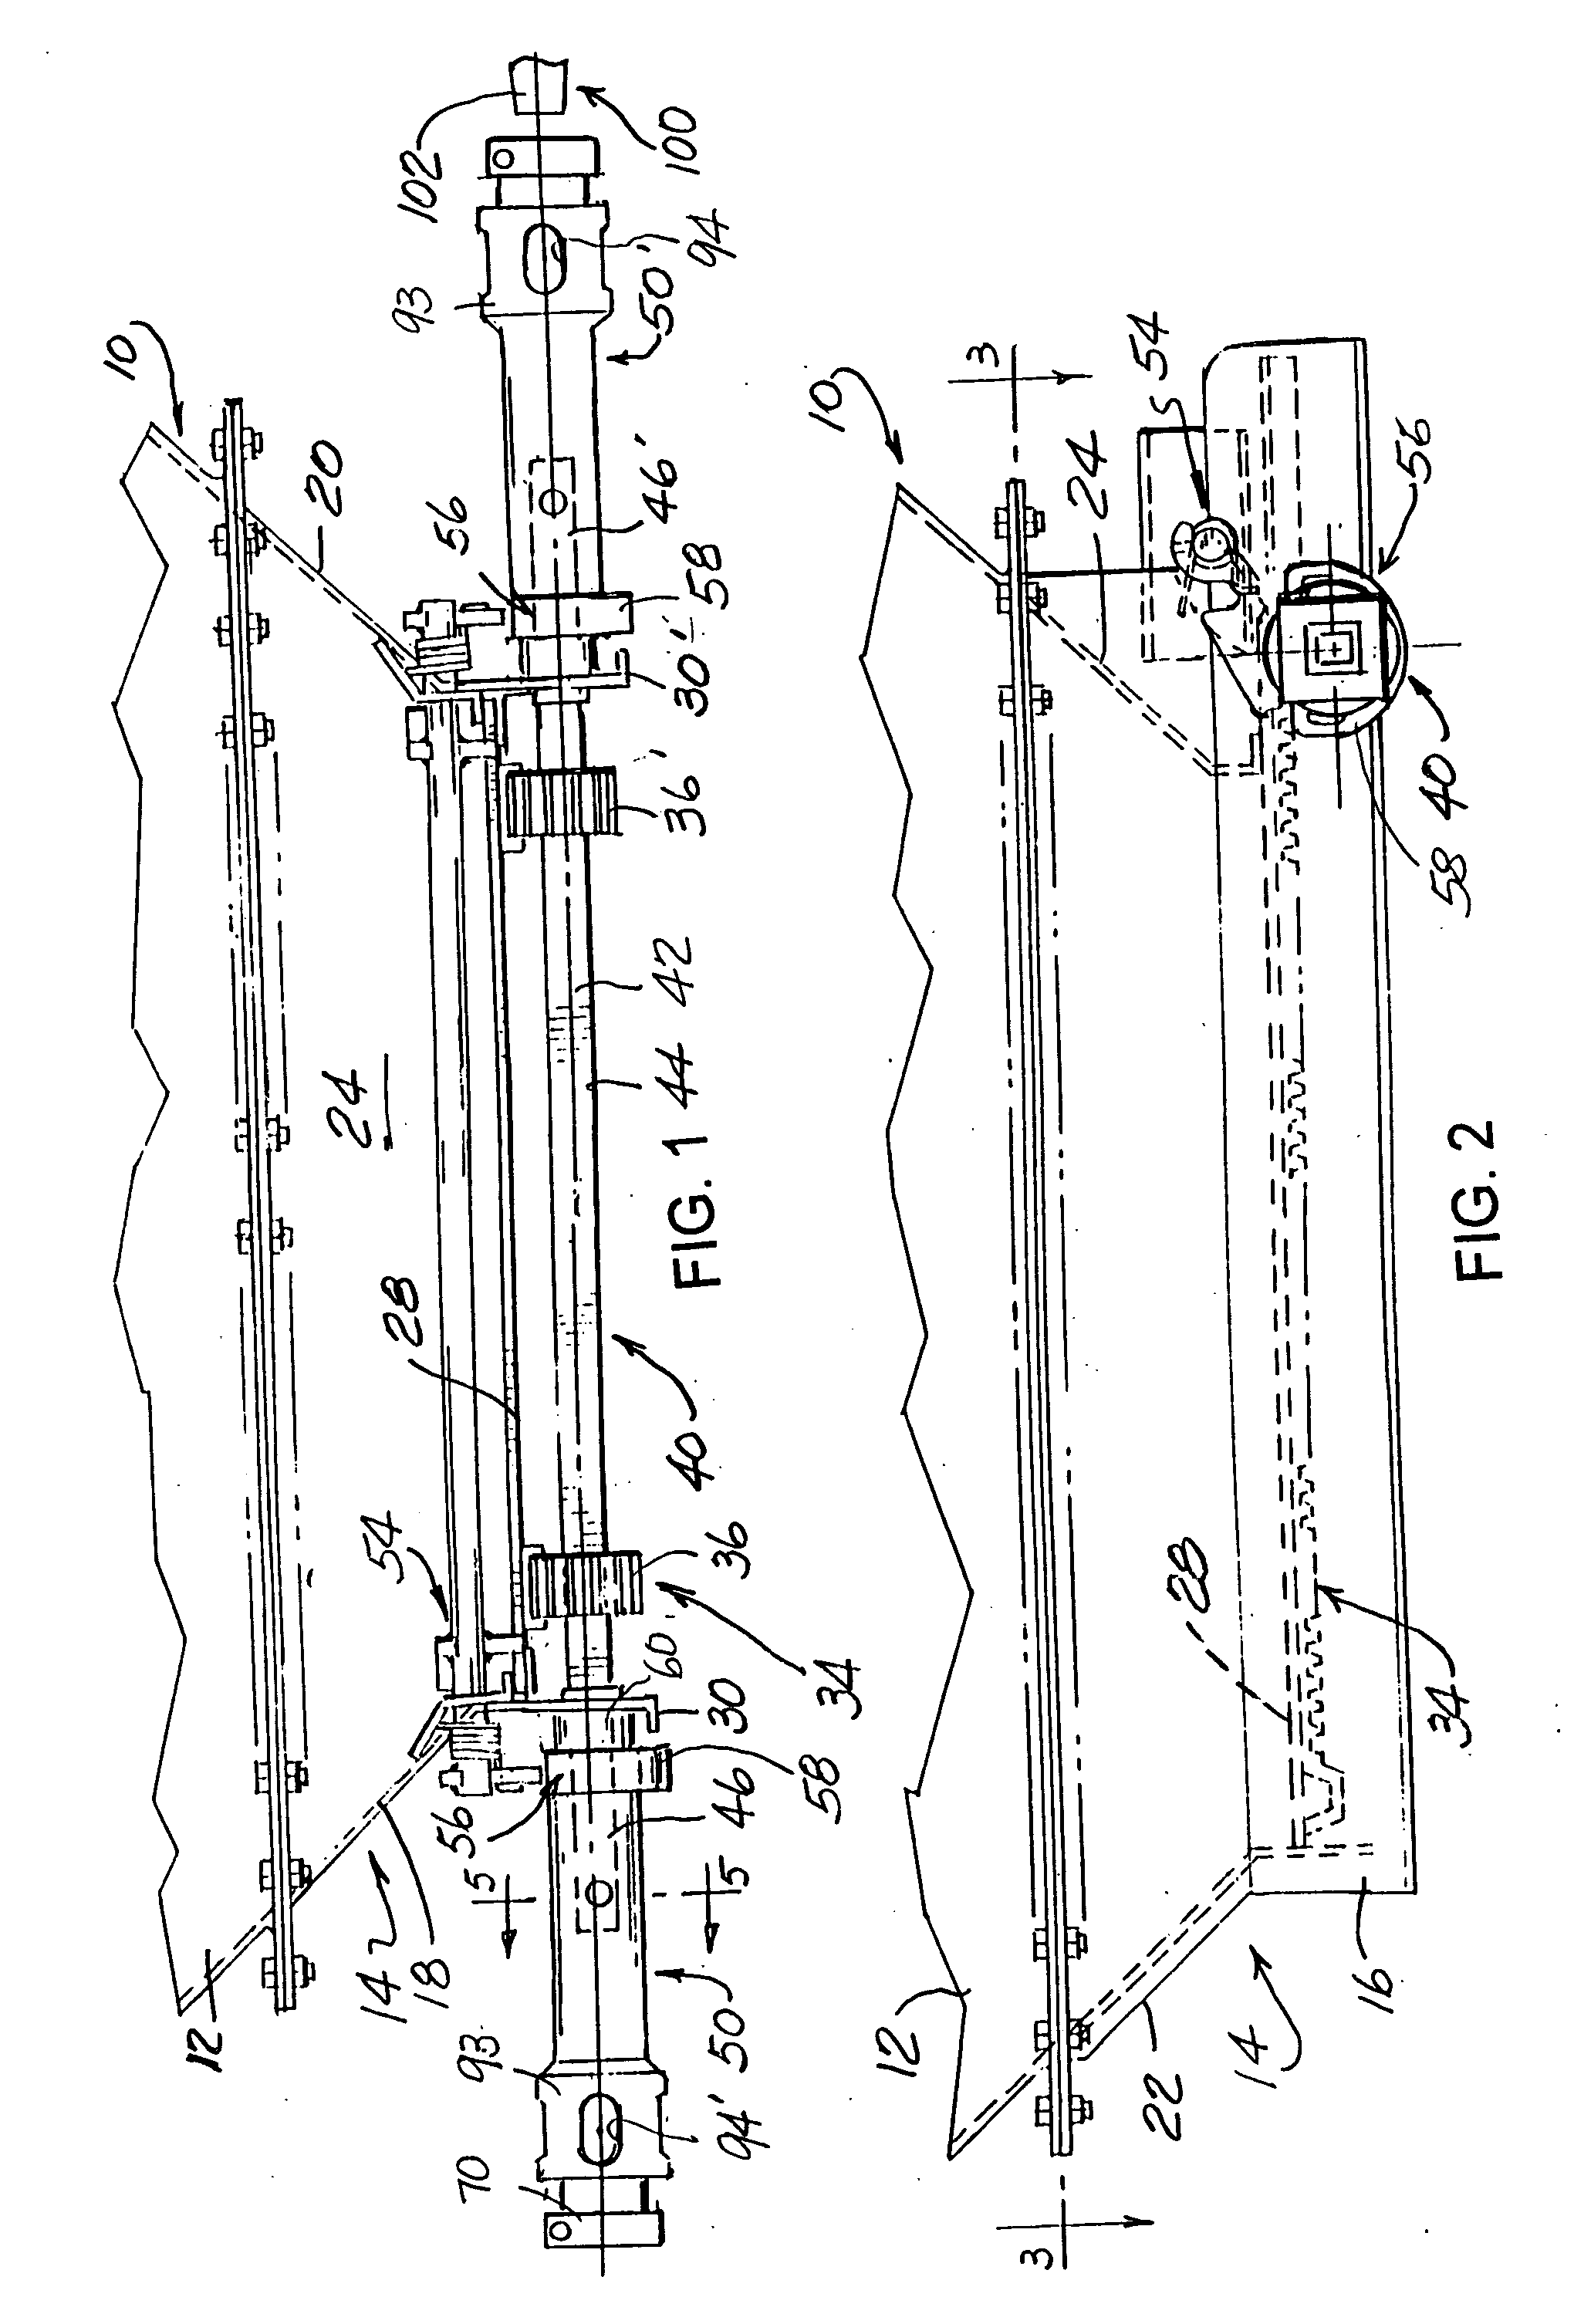 Operating shaft assembly for railcars